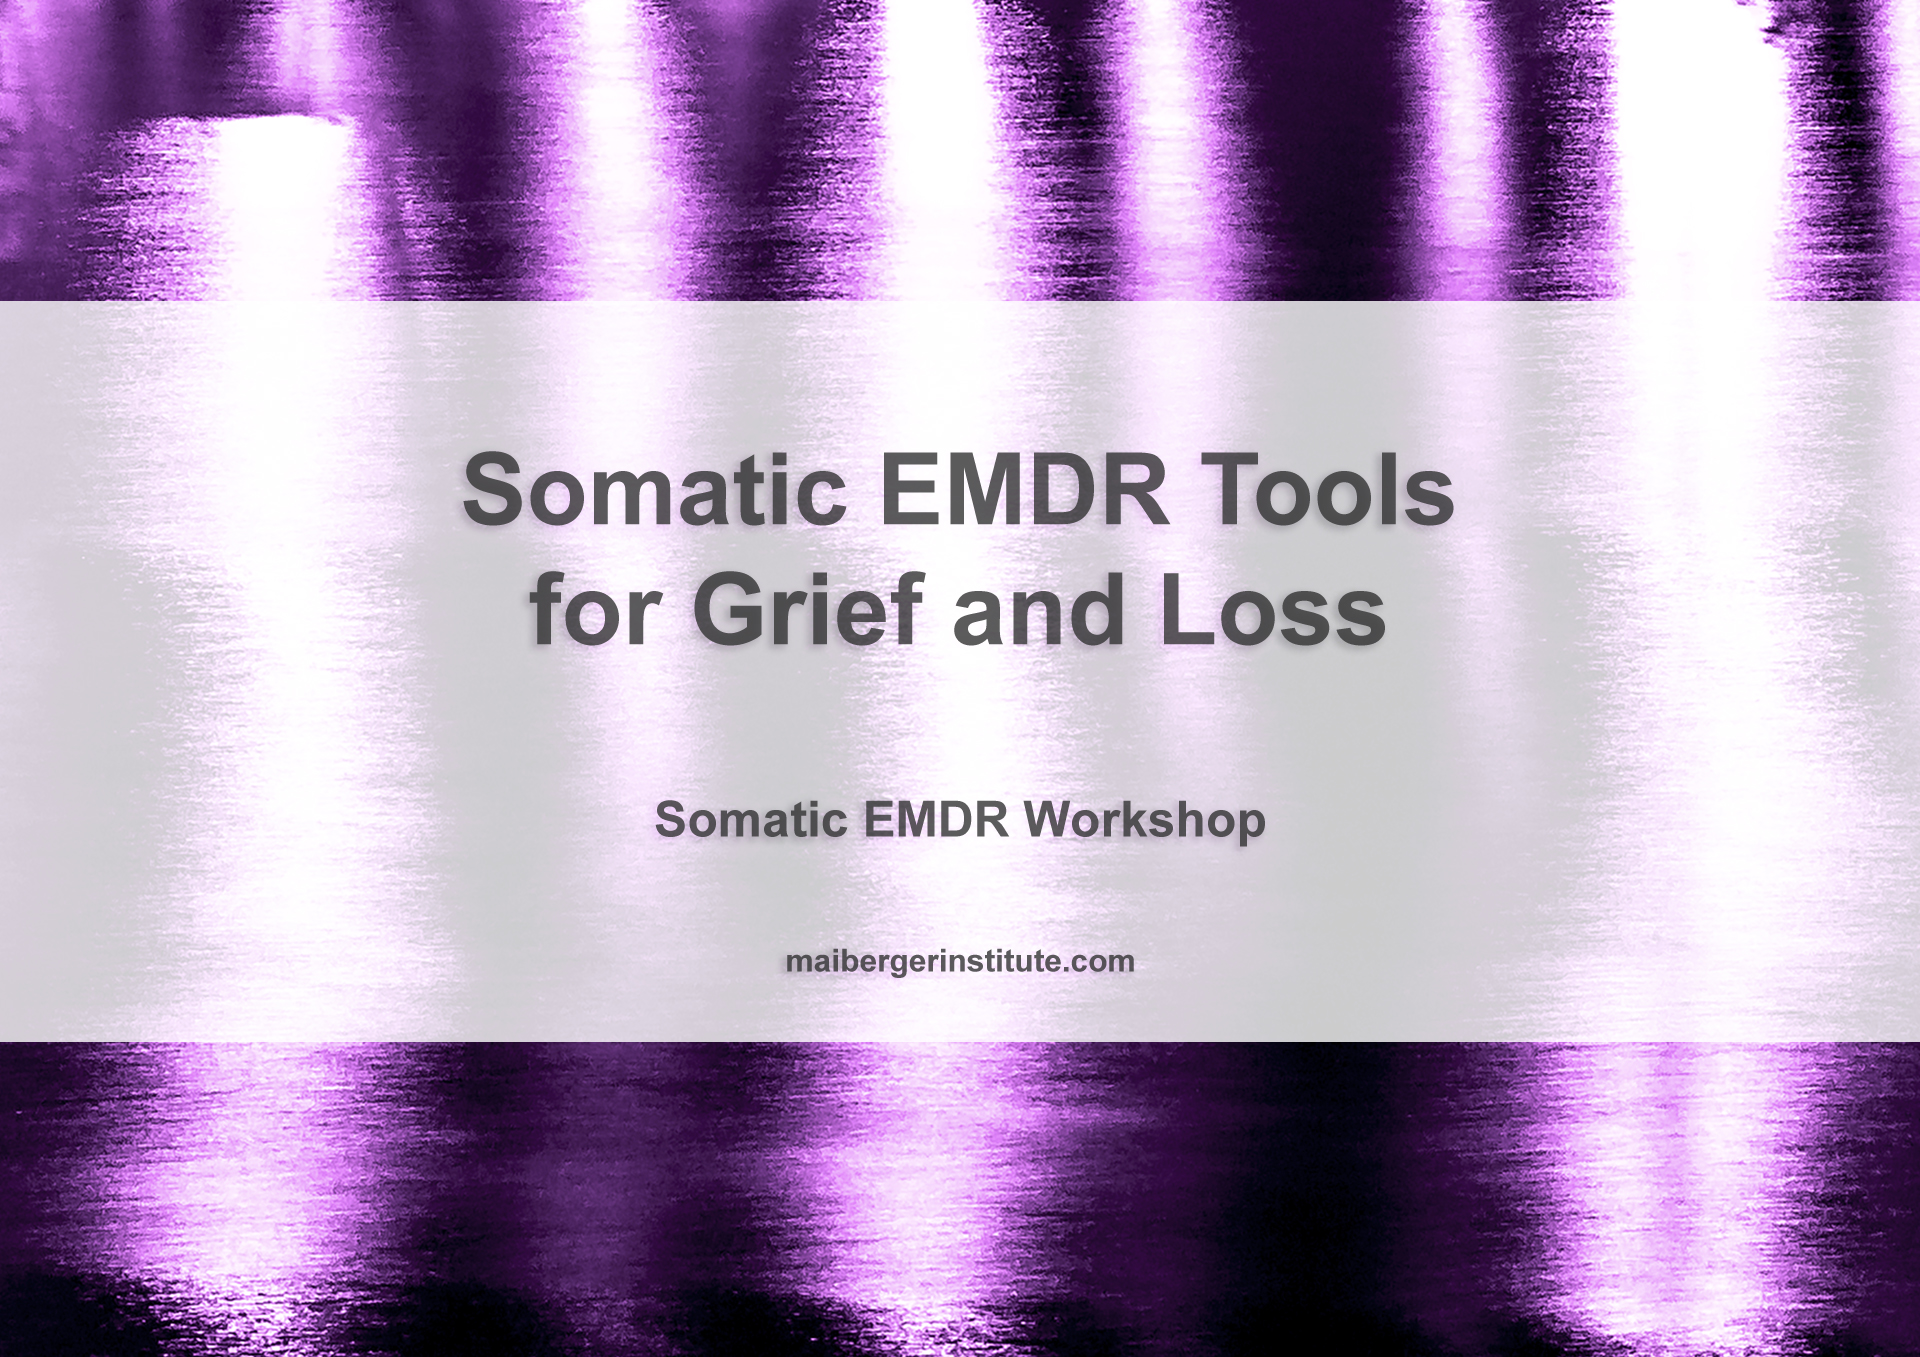 Somatic EMDR Tools for Grief and Loss - Somatic EMDR Workshop - Maiberger Institute - Barb Maiberger and Katie Asmus